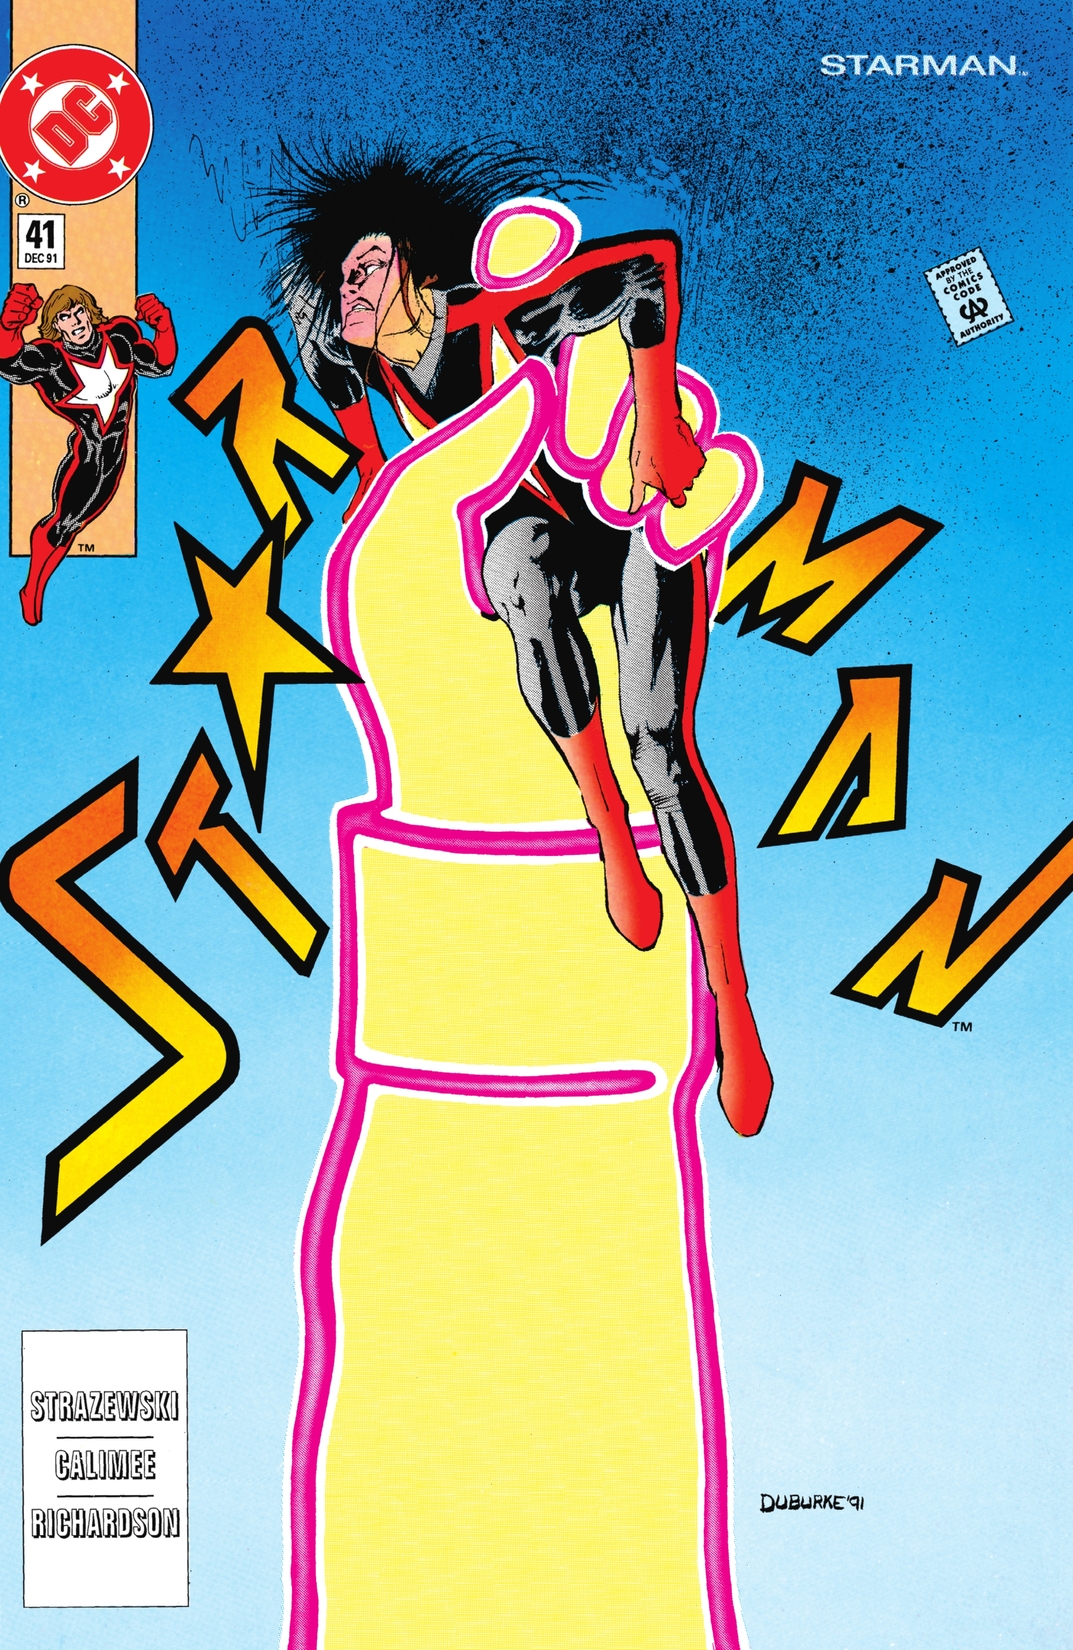 Starman (1988-) #41 preview images